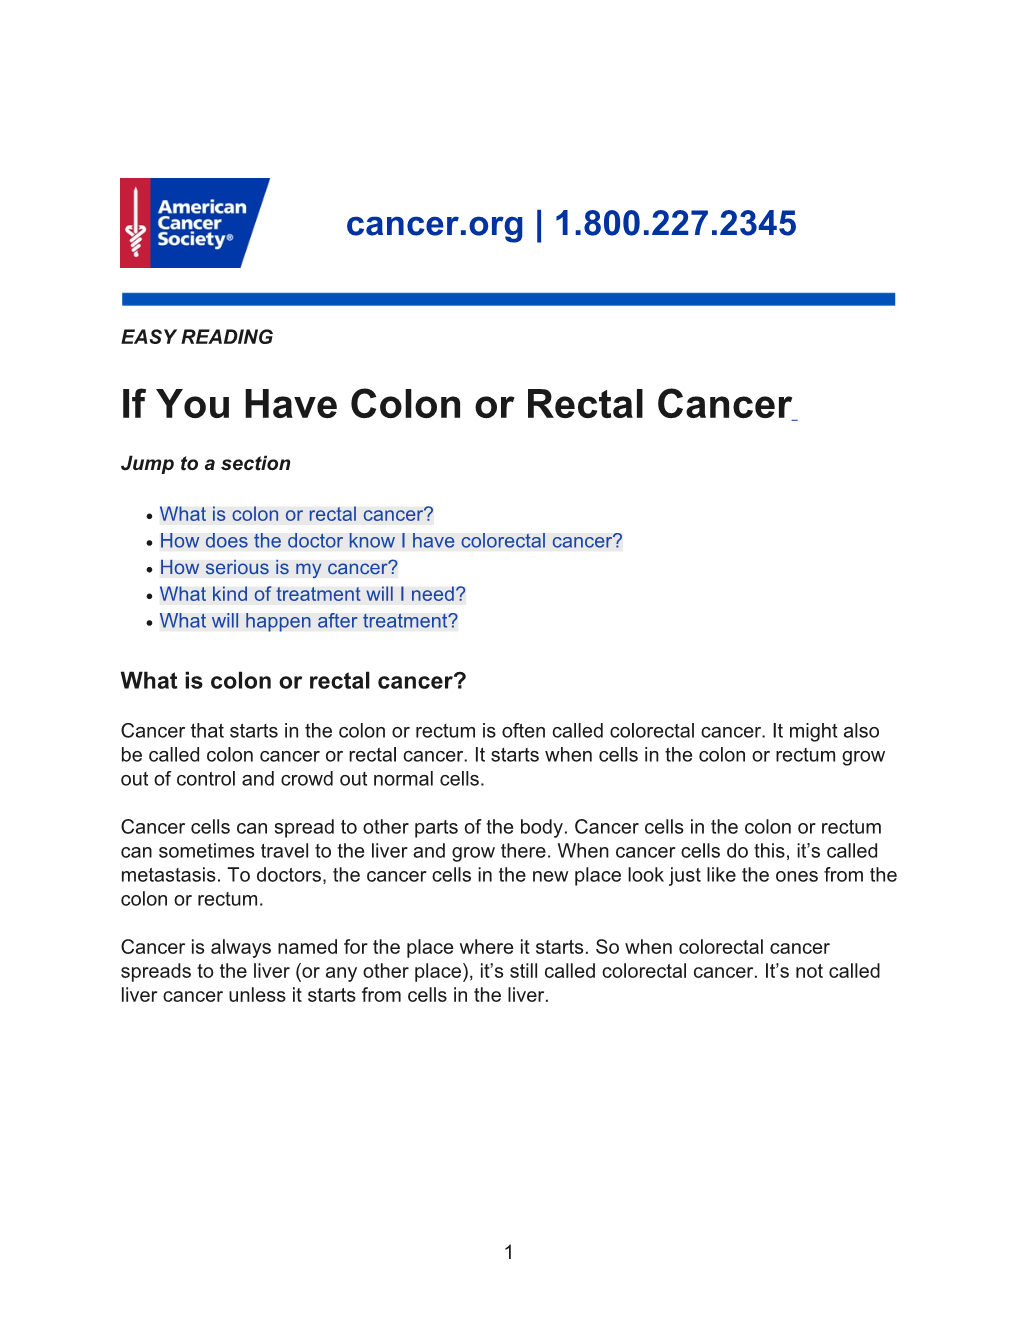 If You Have Colon Or Rectal Cancer